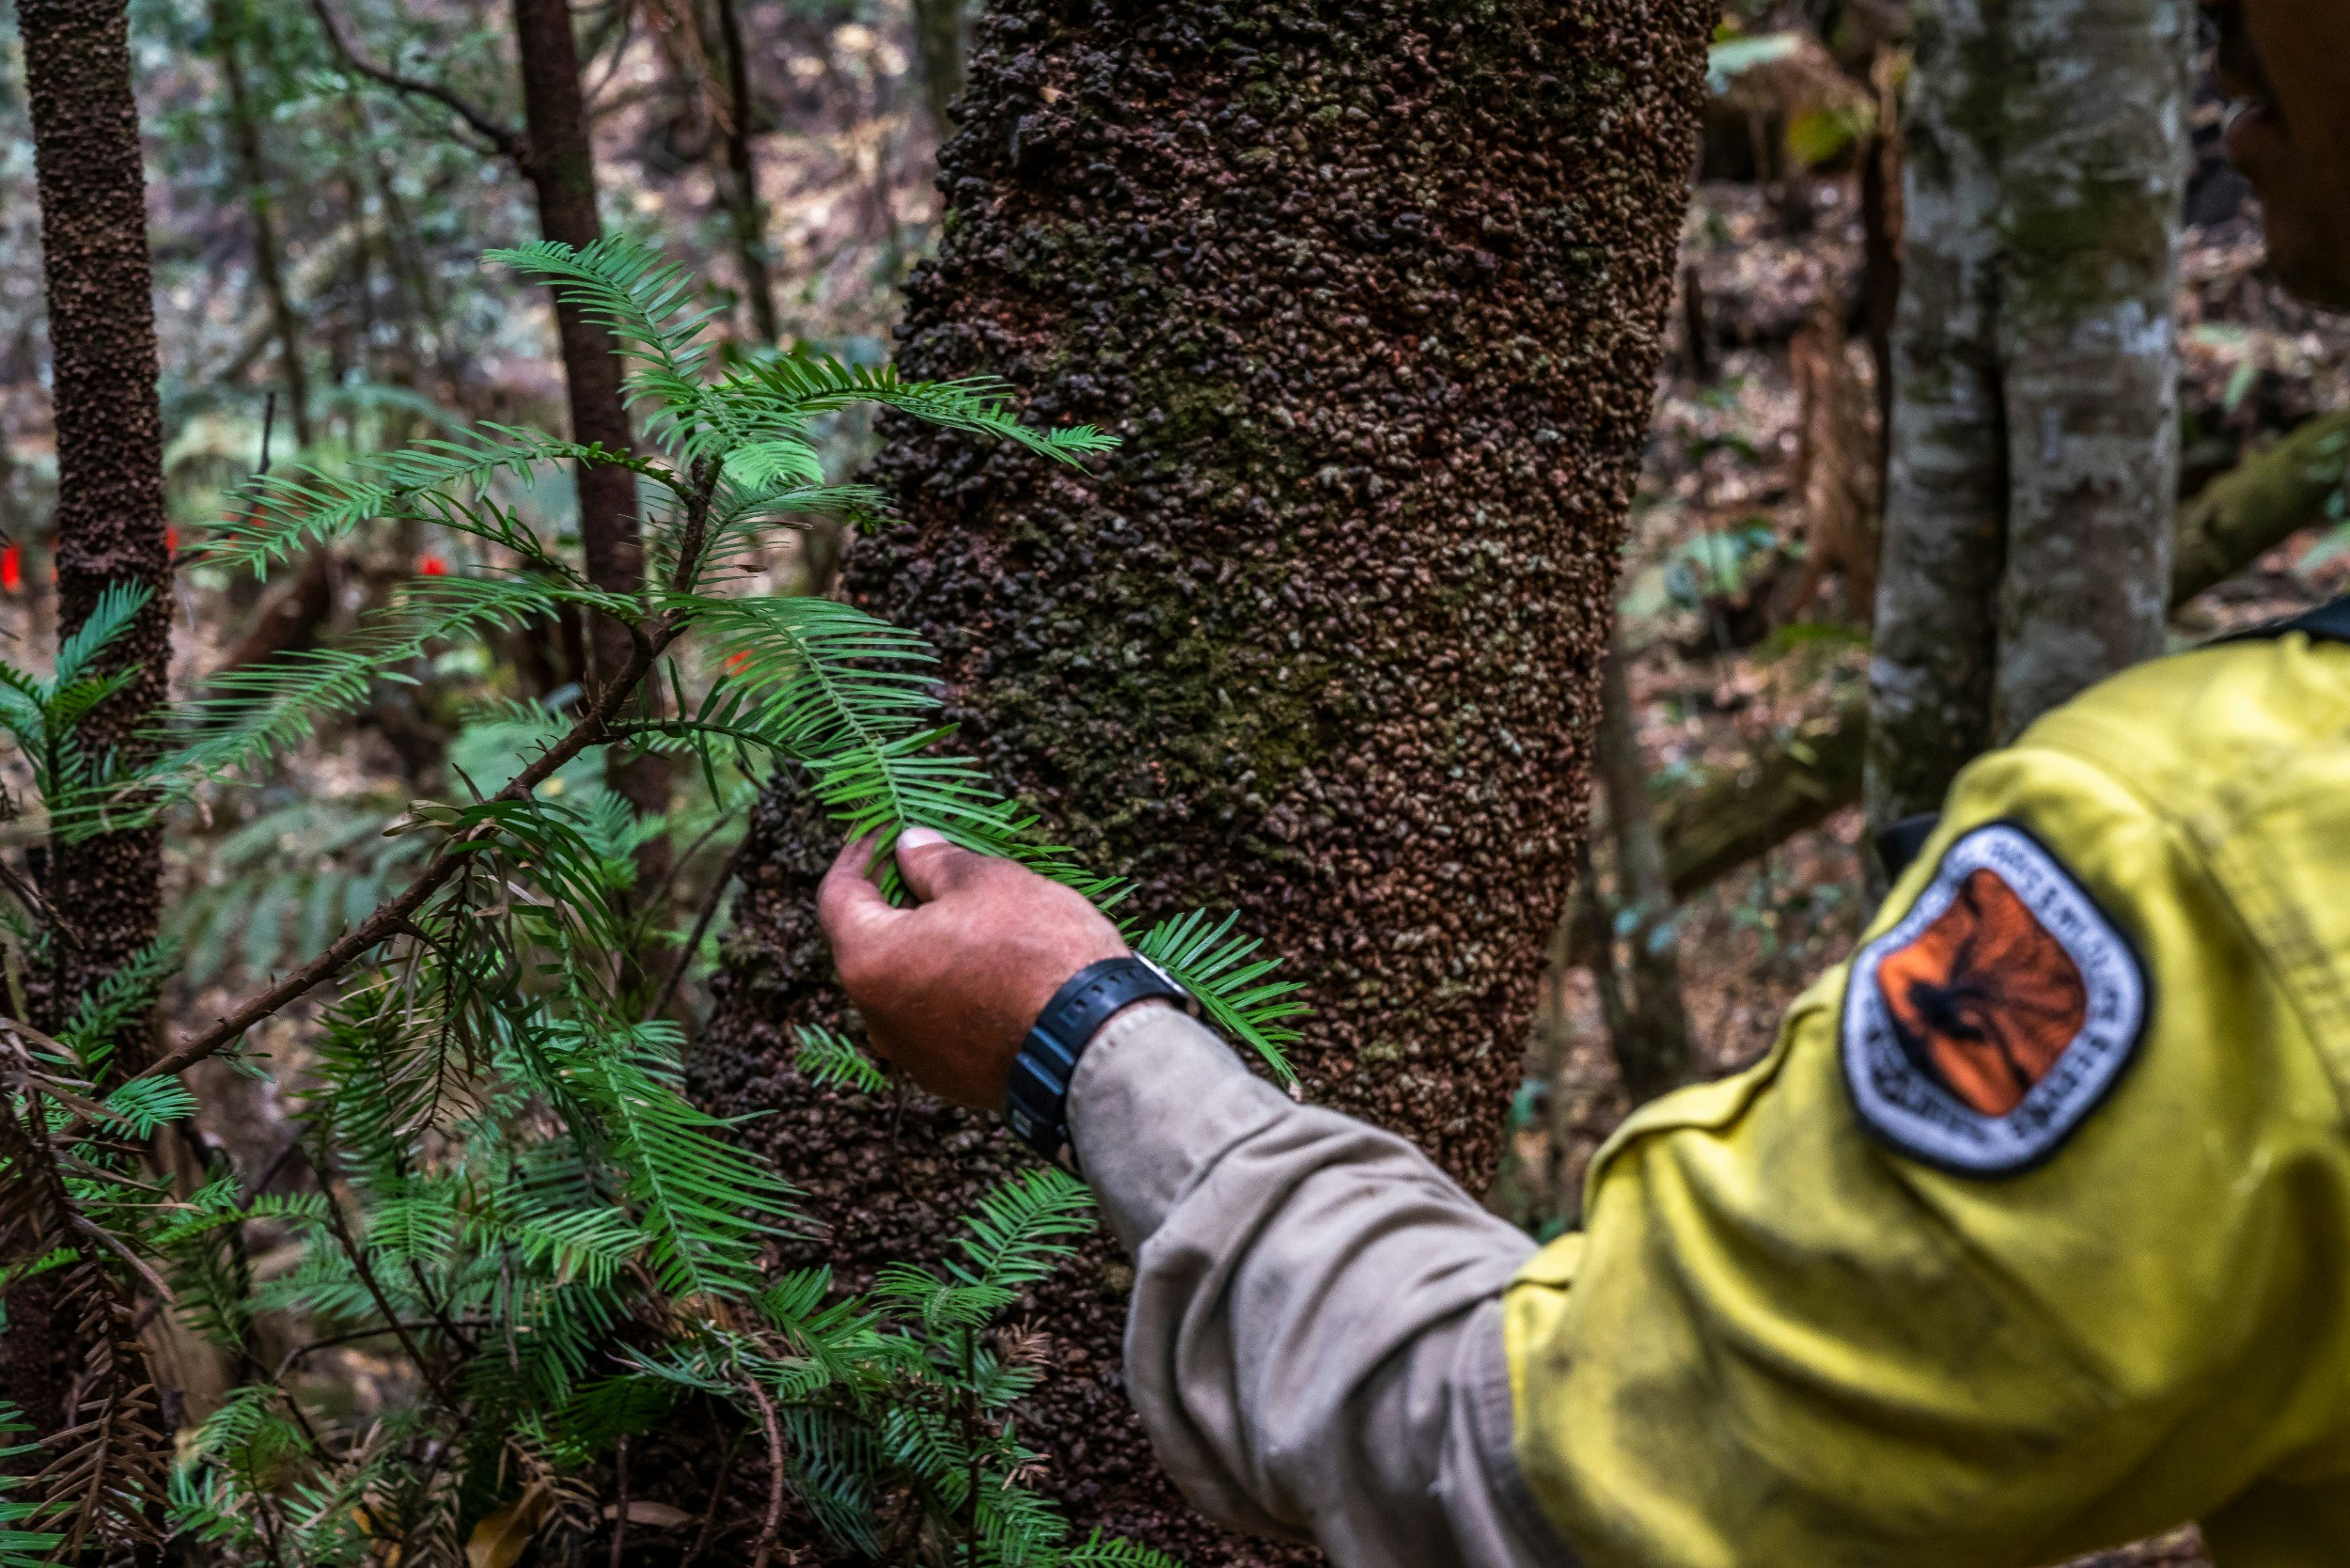 A firefighter examining a Wollemi pine tree